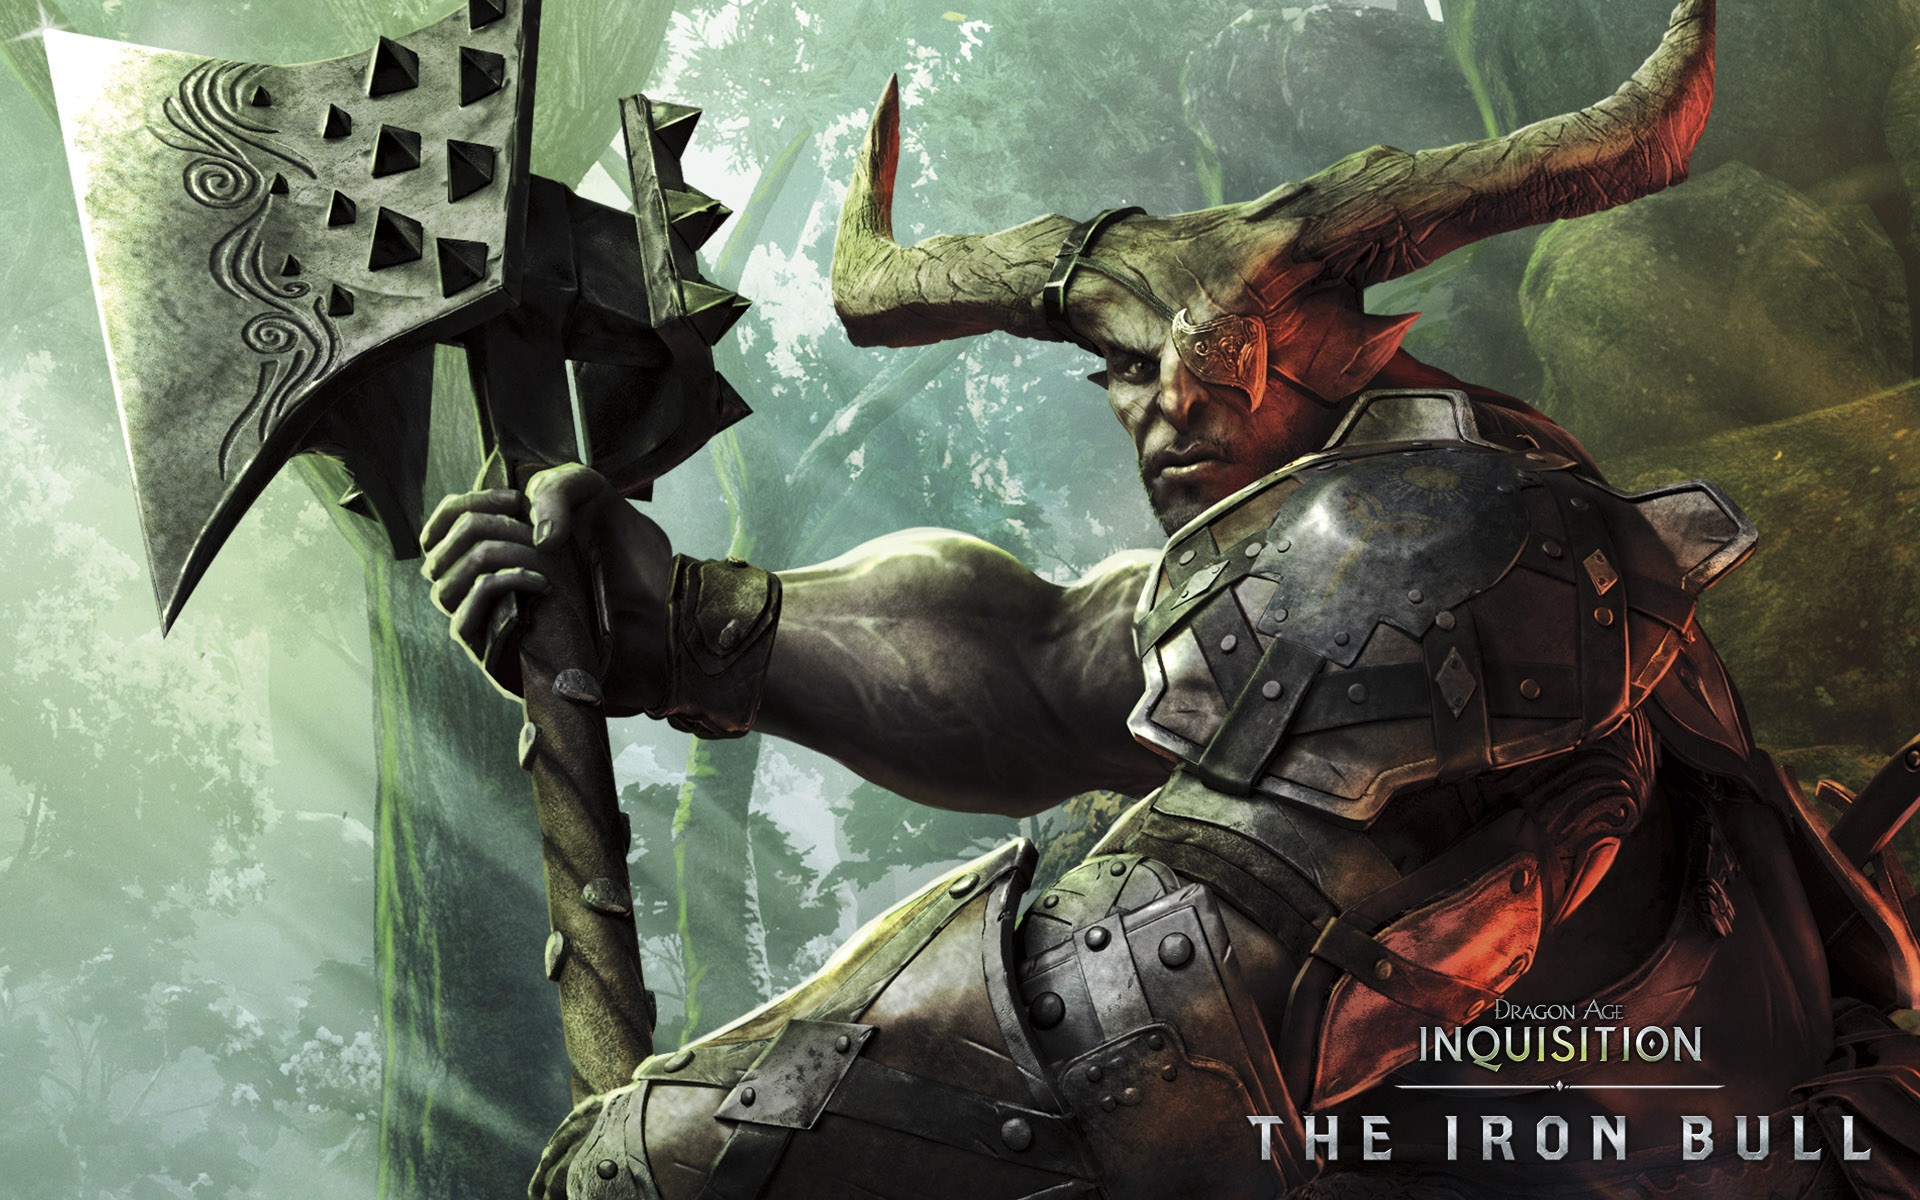  the Collection Dragon Age Video Game Dragon Age Inquisition 556186 1920x1200